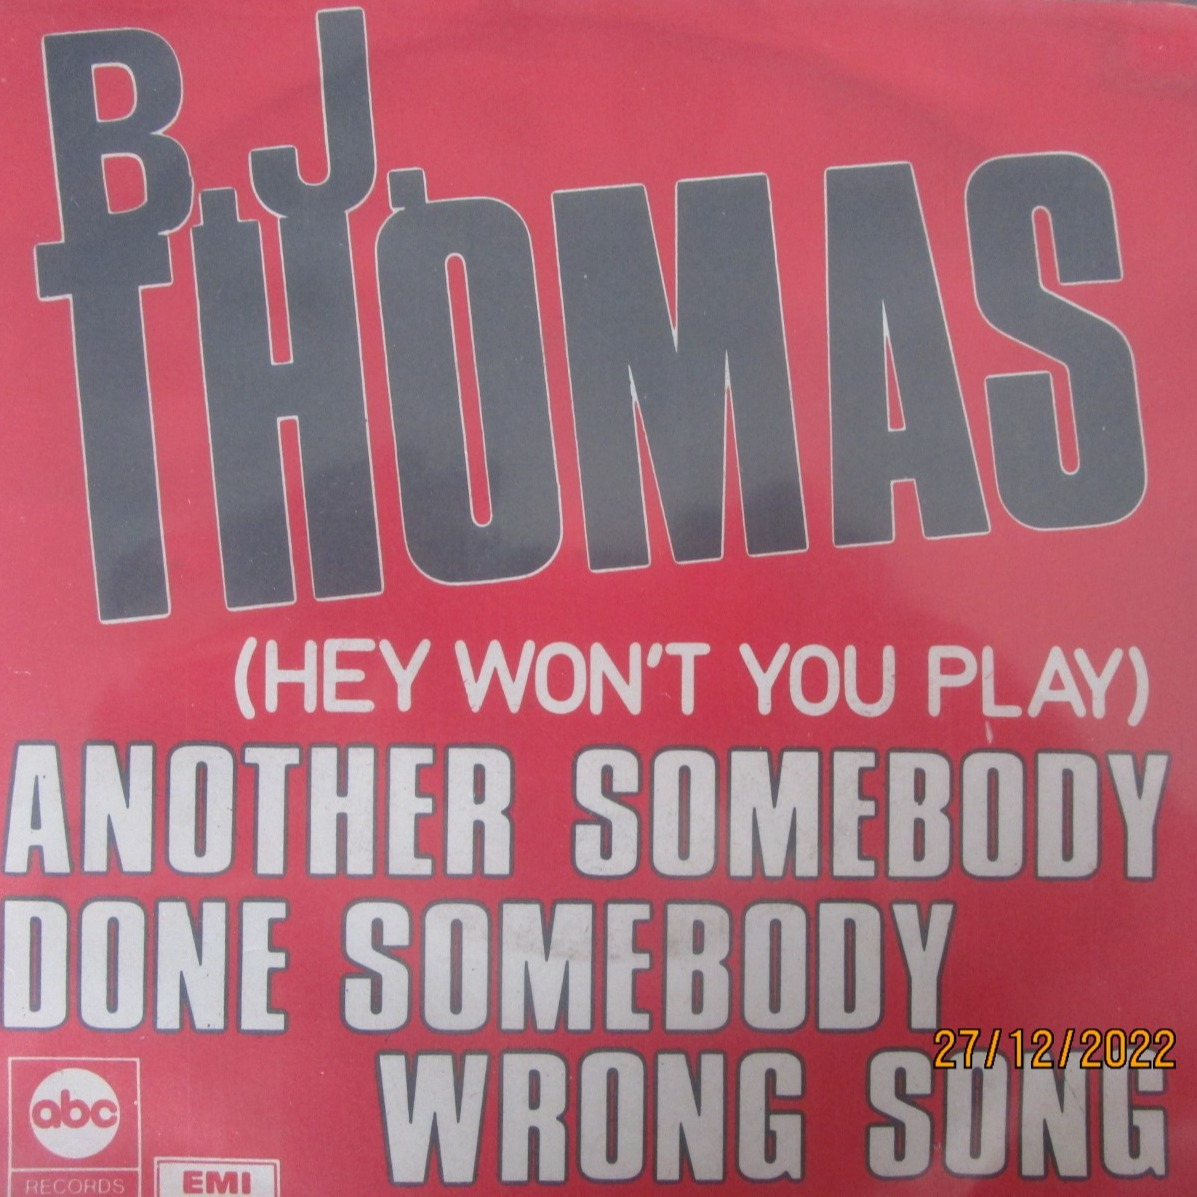 Item Another somebody done somebody wrong song / City boys product image